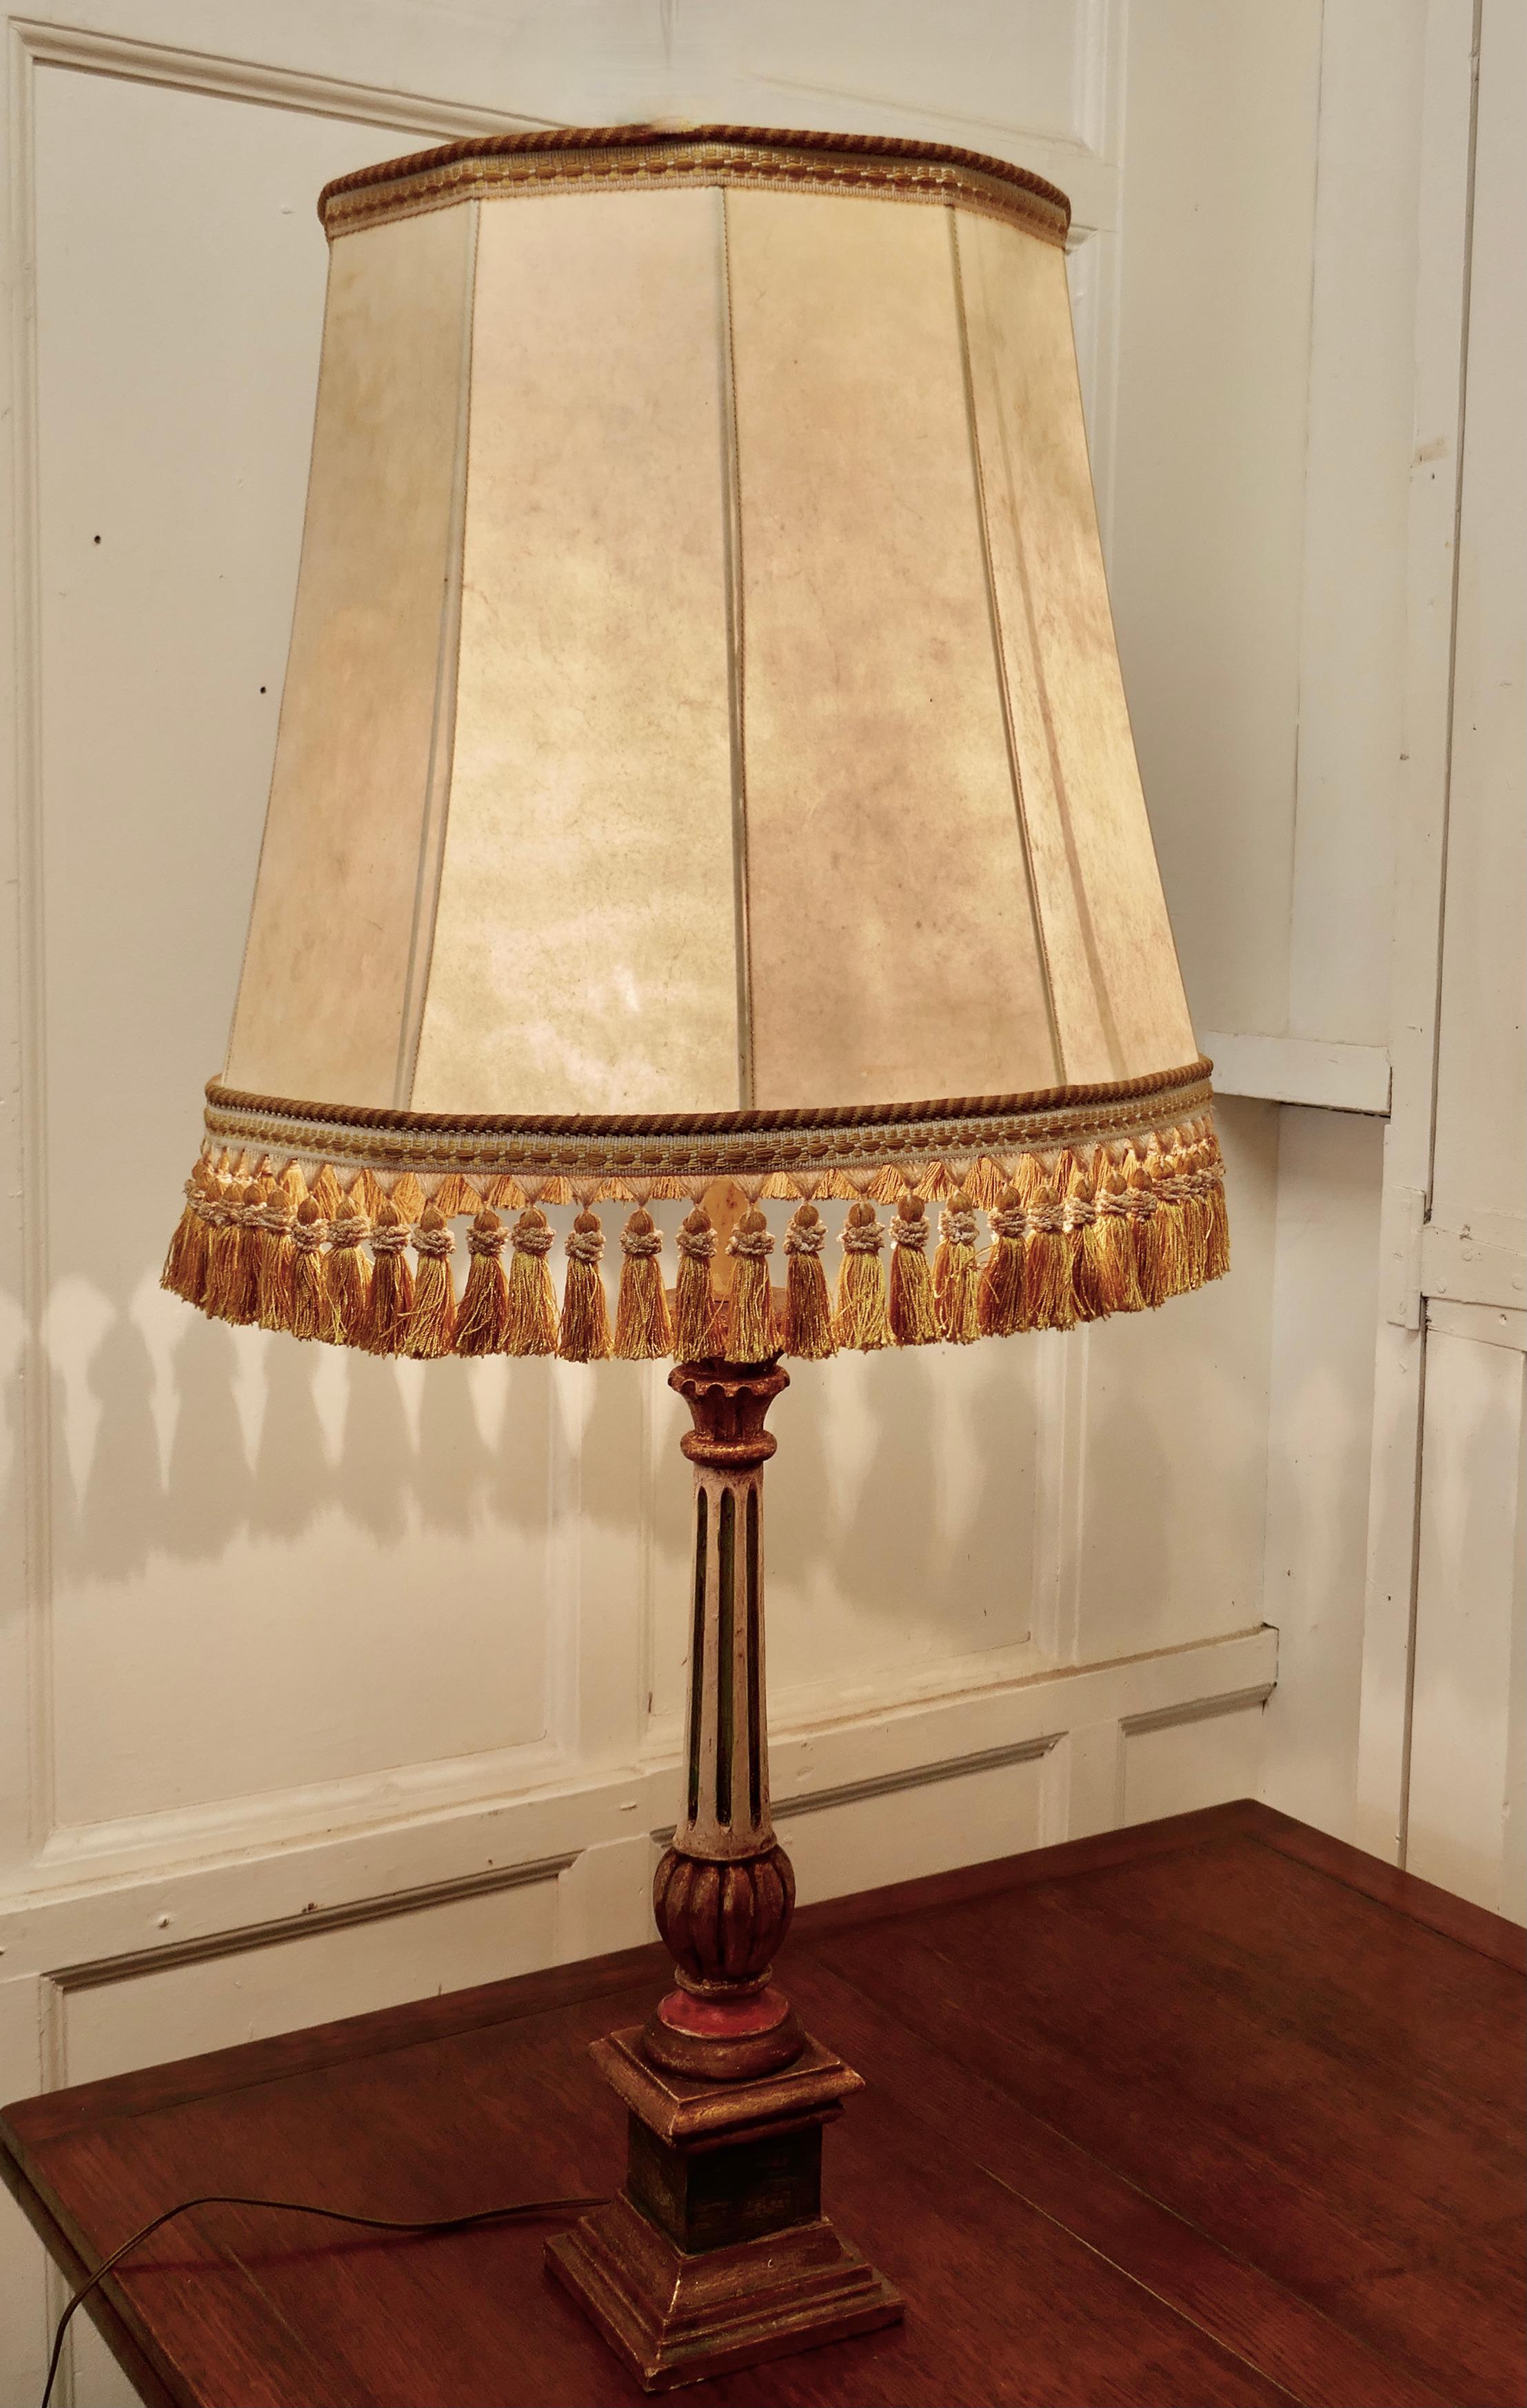 1920s Corinthian column painted lamp, Vellum Shade

This an attractive painted lamp, the lamp has a fluted Column which is painted in Gold, Green and Cream, the paint has now aged in colour and developed a charming faded finish, the lamp has its